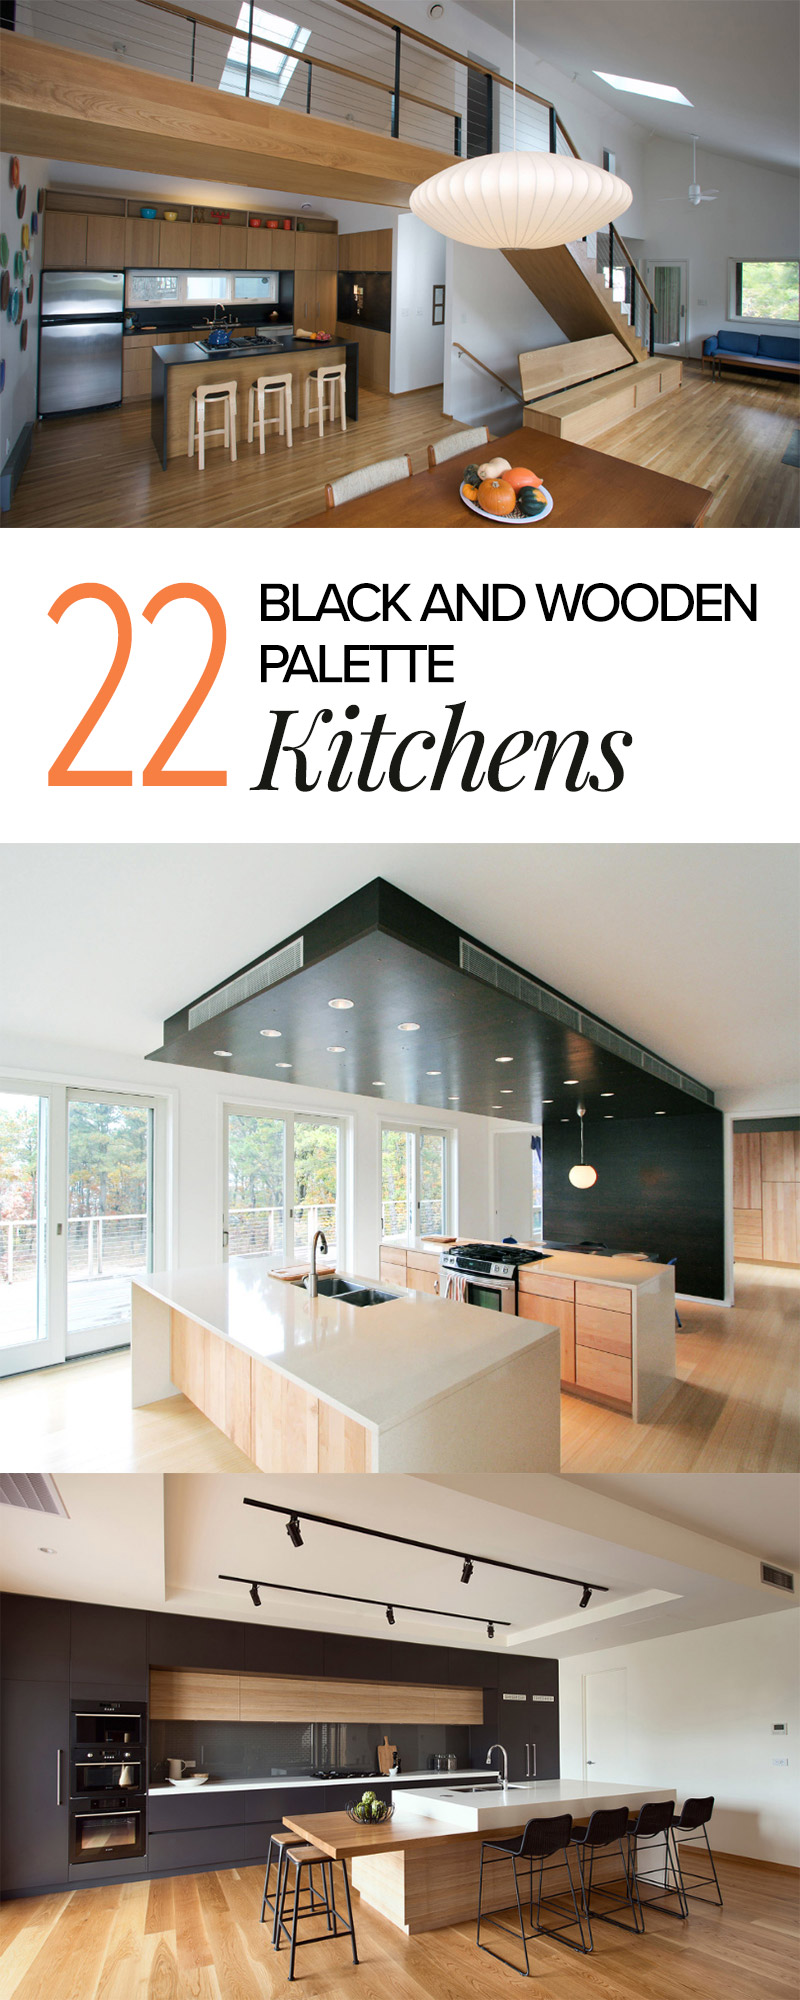 22 Kitchens in Black and Wooden Palette